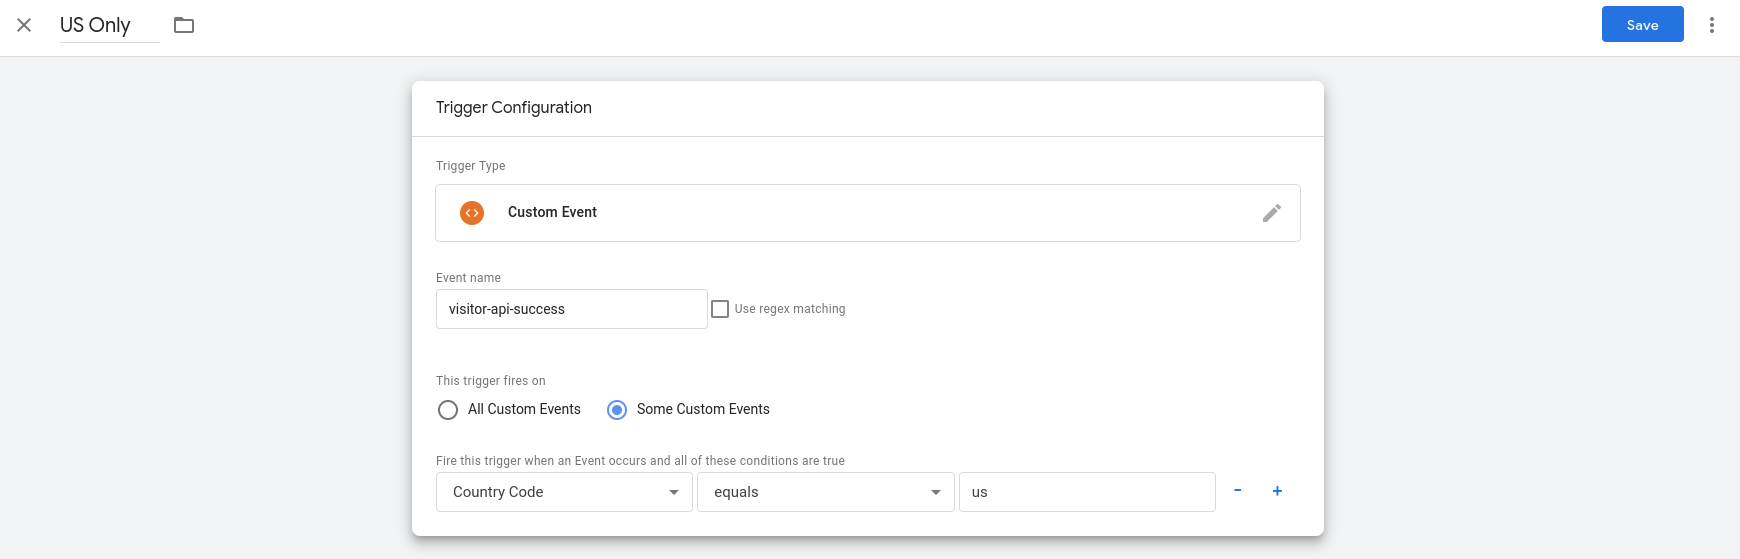 Create a marketing tag for the US visitors in Google Tag Manager